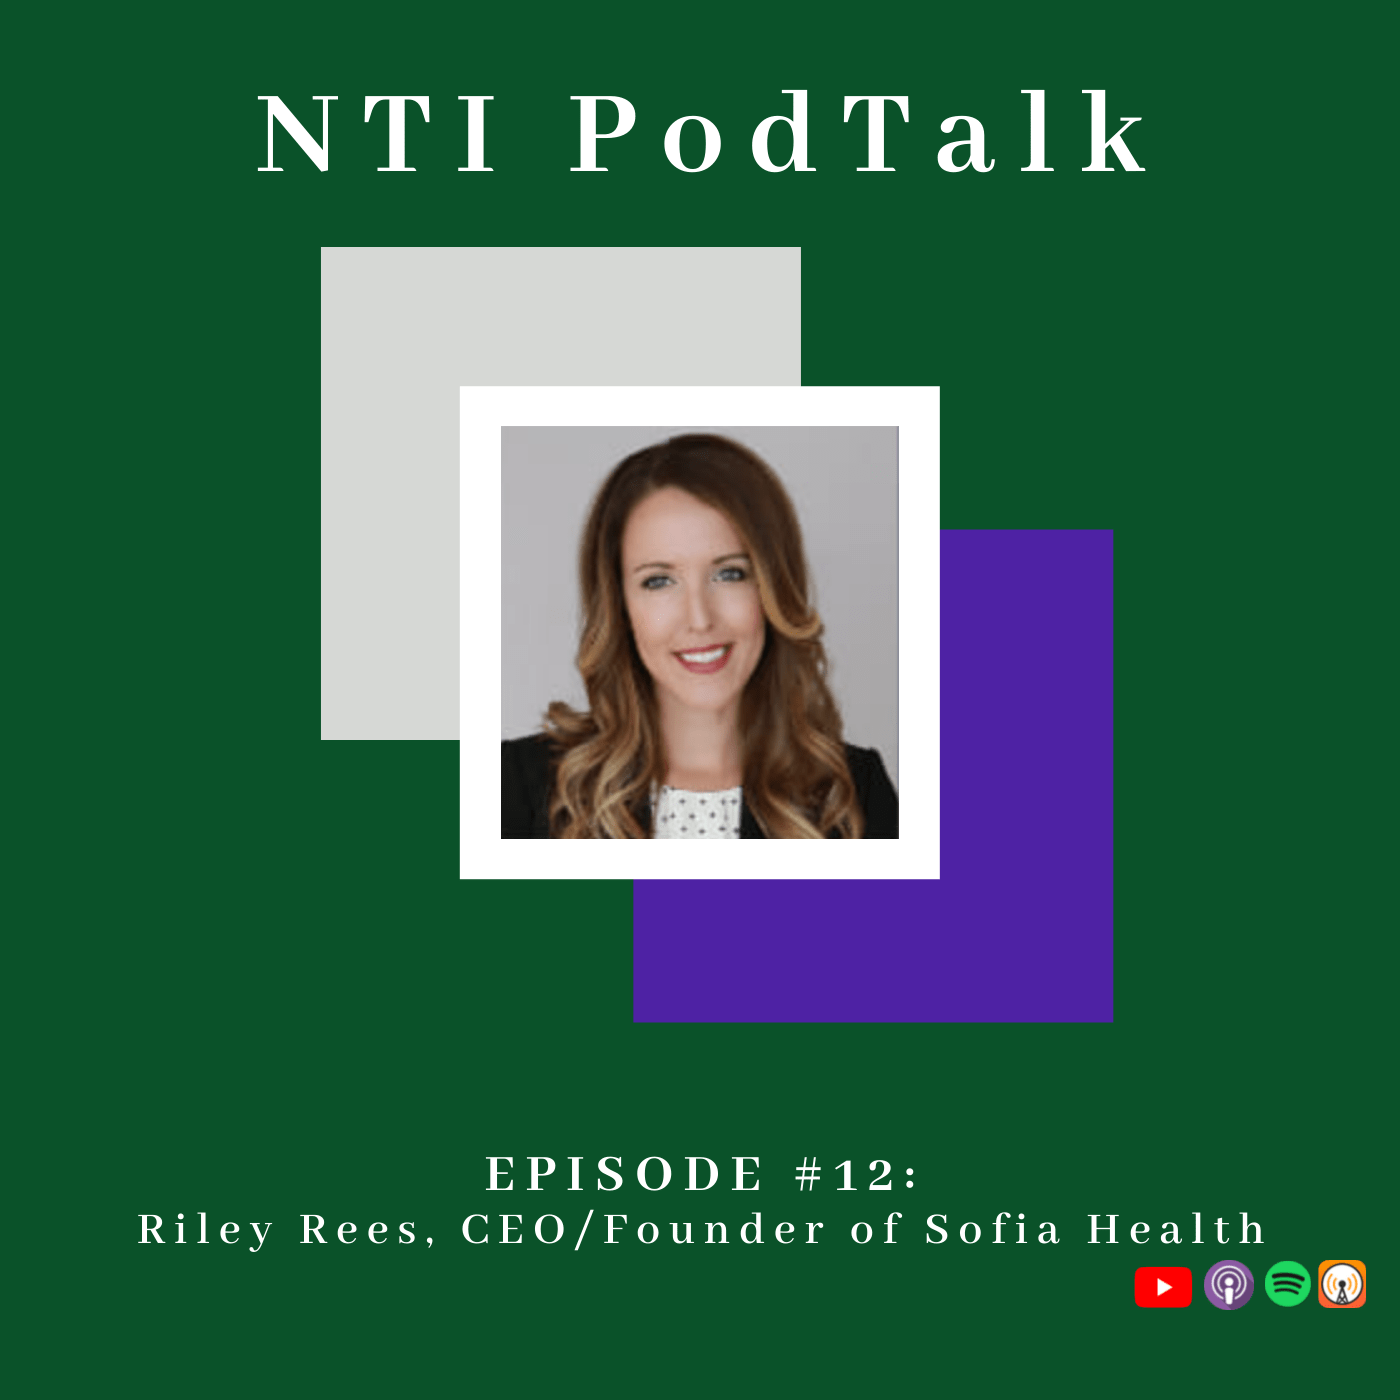 Featured image for “NTI PodTalk with Riley Rees from Sofia Health”